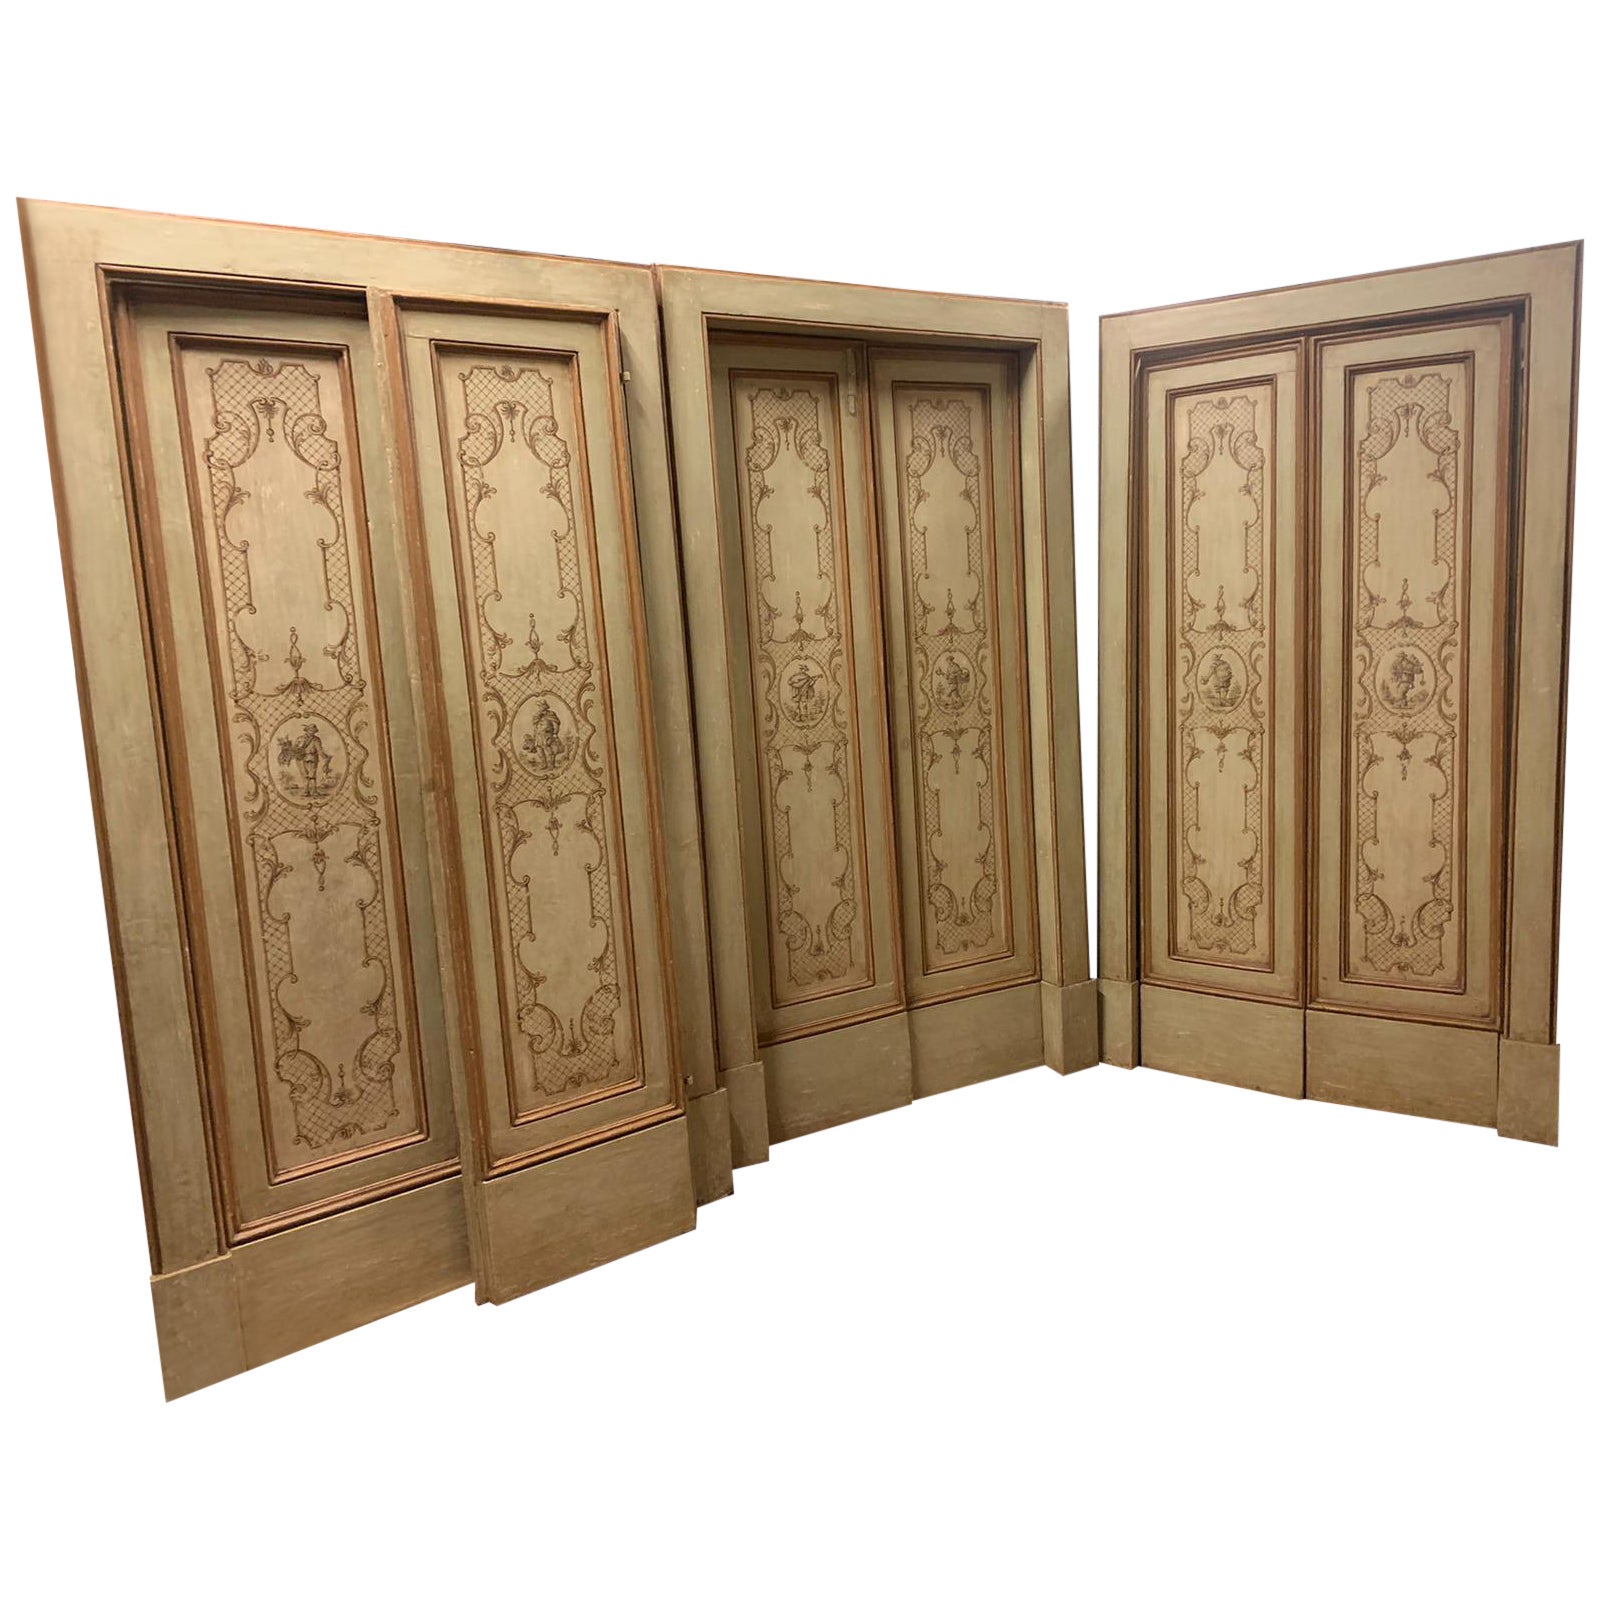 Set of 3 Antique Painted Double Doors with Original Frame, 18th Century Italy For Sale